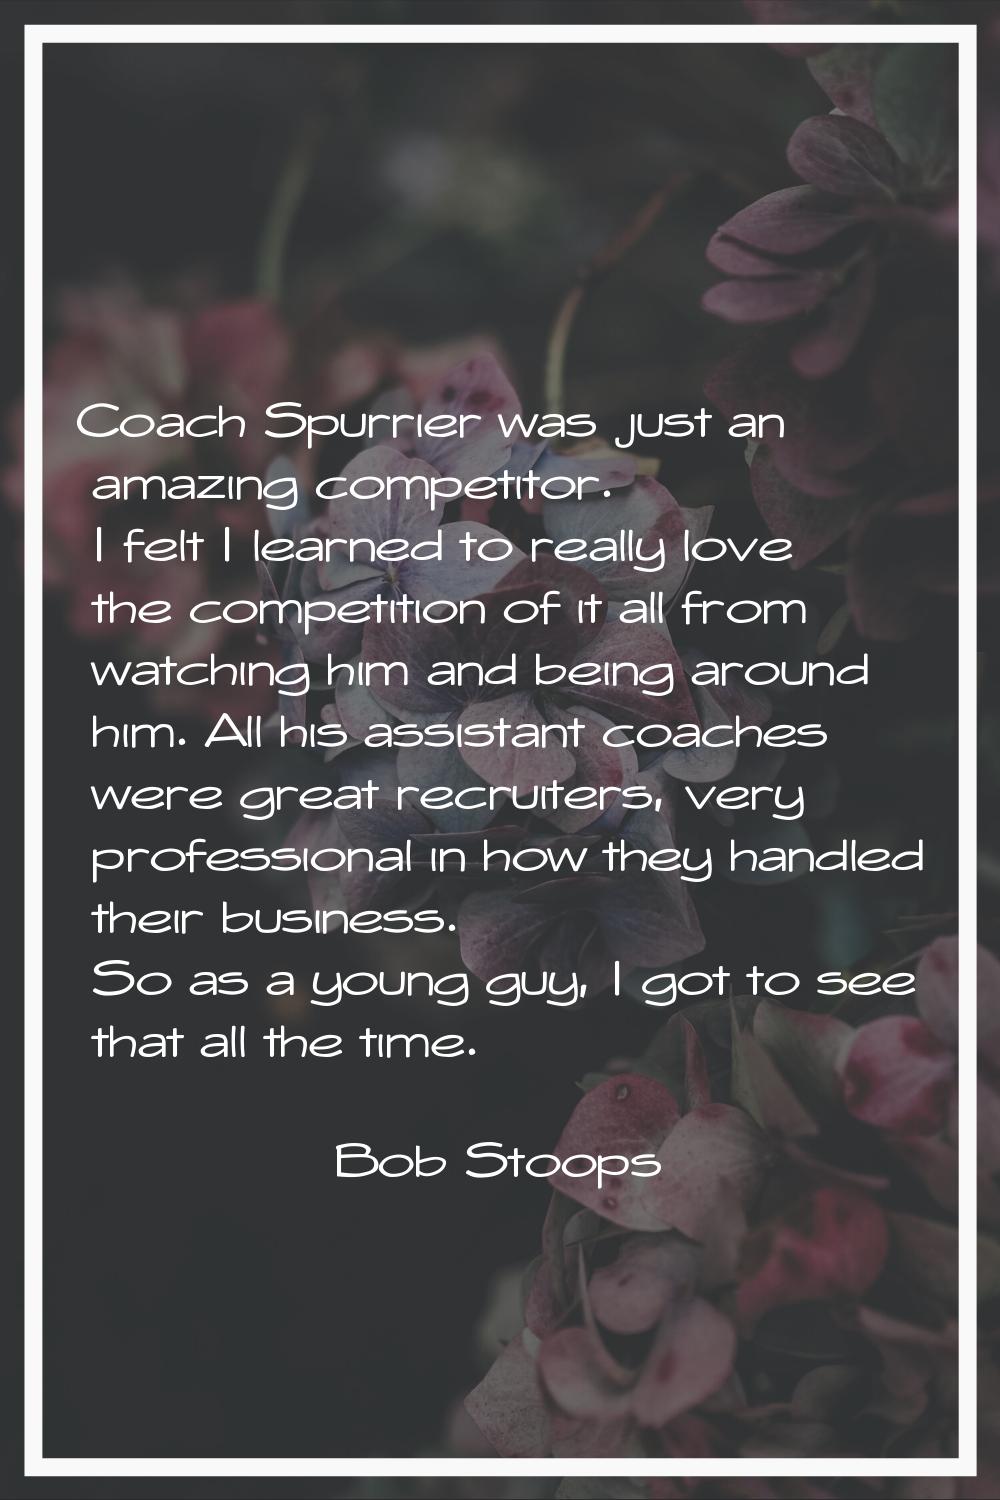 Coach Spurrier was just an amazing competitor. I felt I learned to really love the competition of i